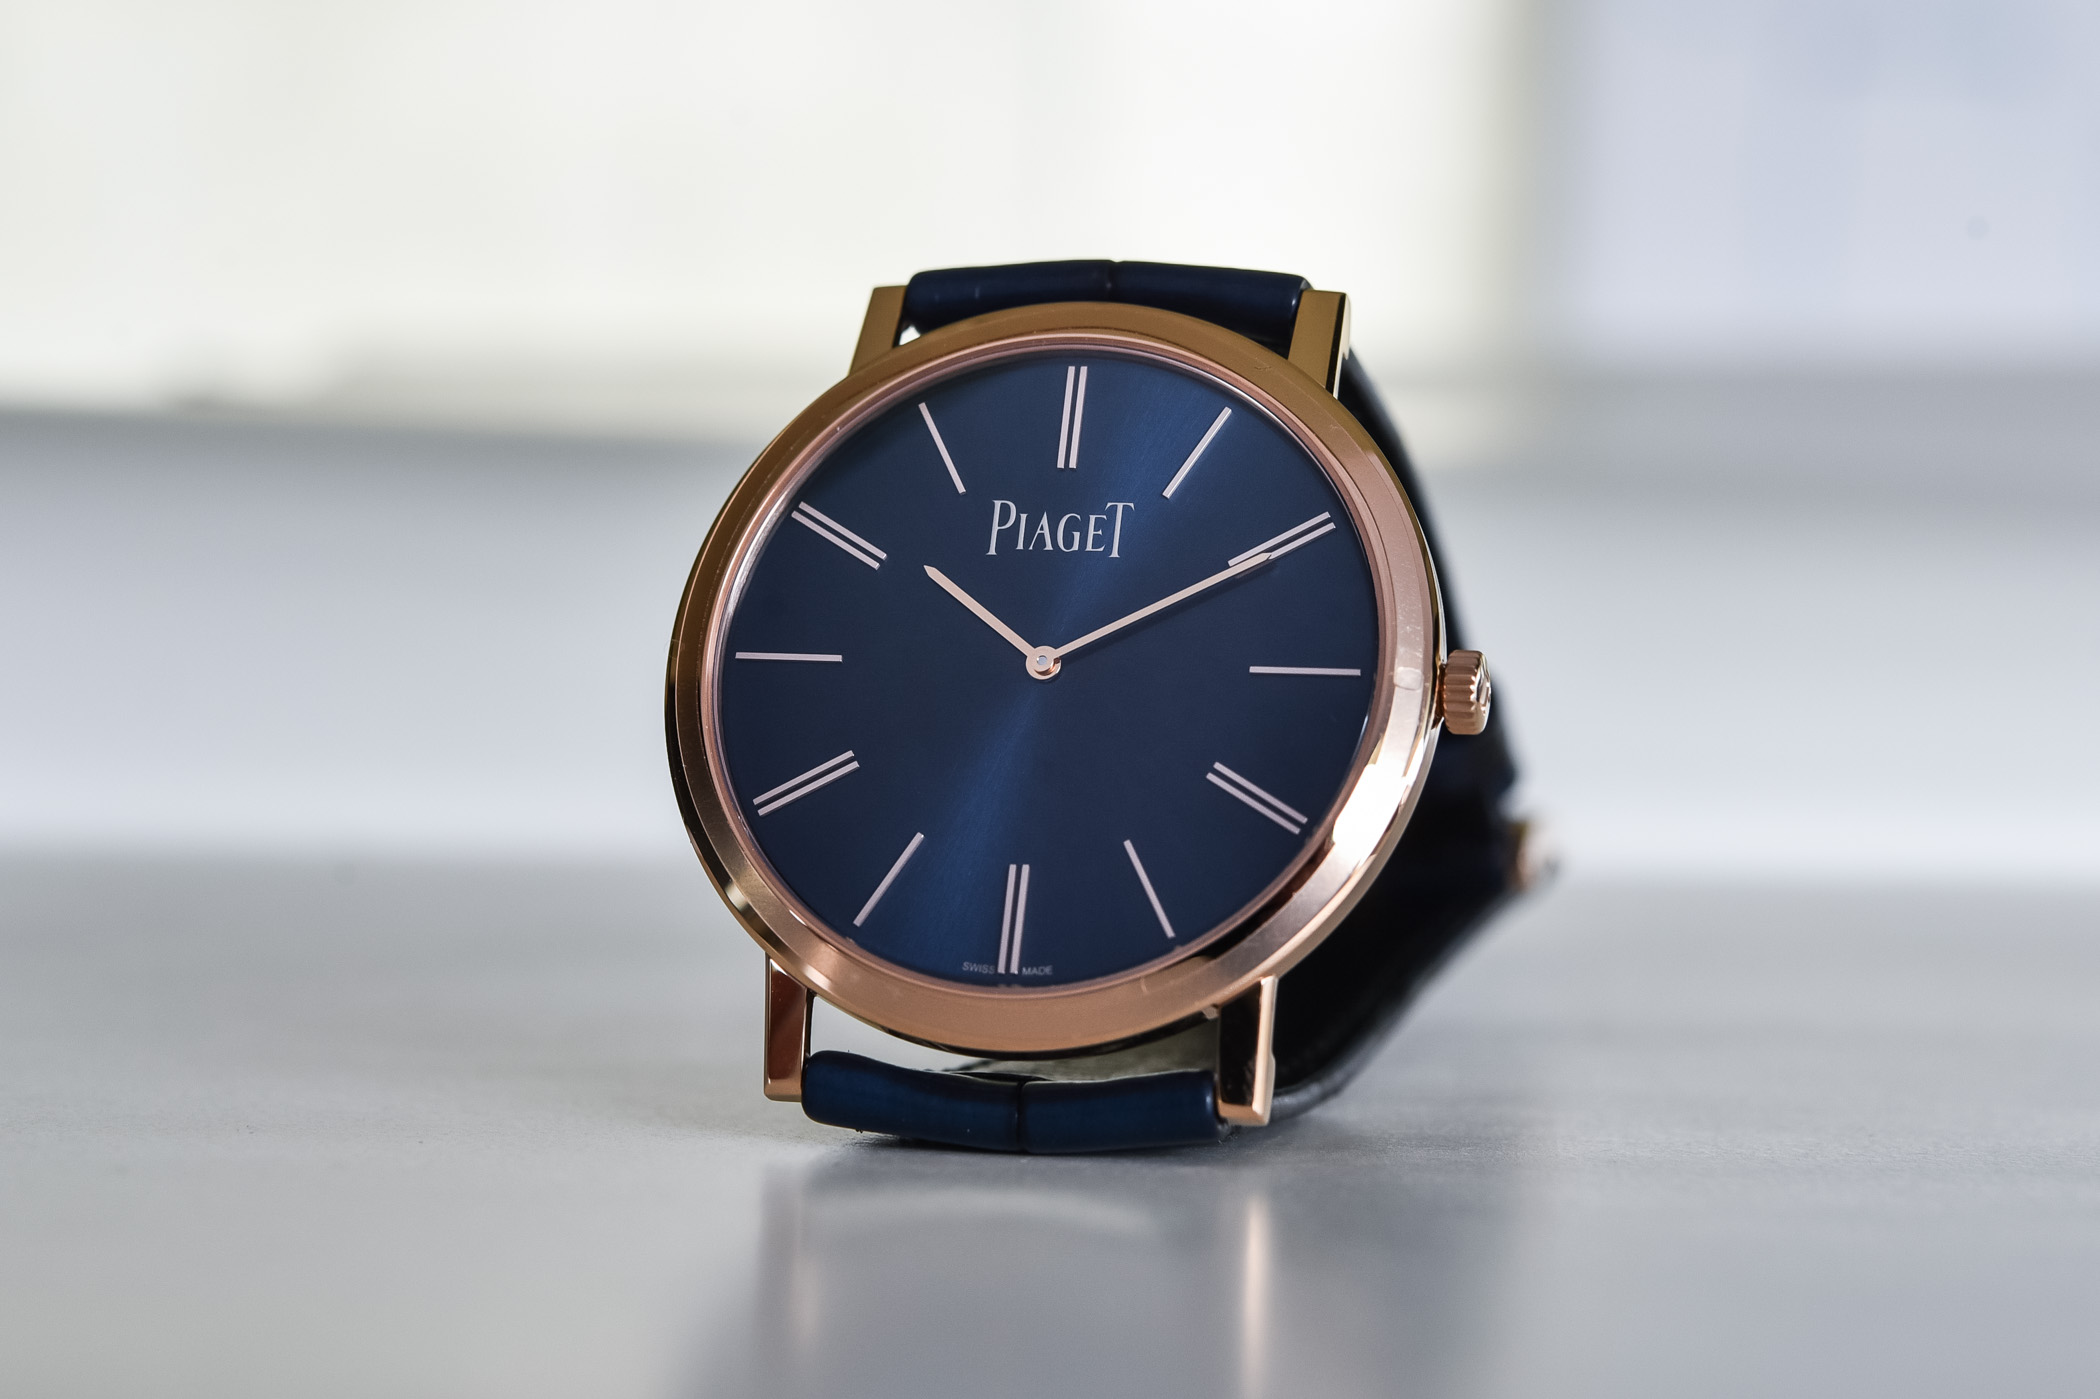 2020 Piaget Altiplano 38mm Hand-Wound blue dial pink gold G0A45050